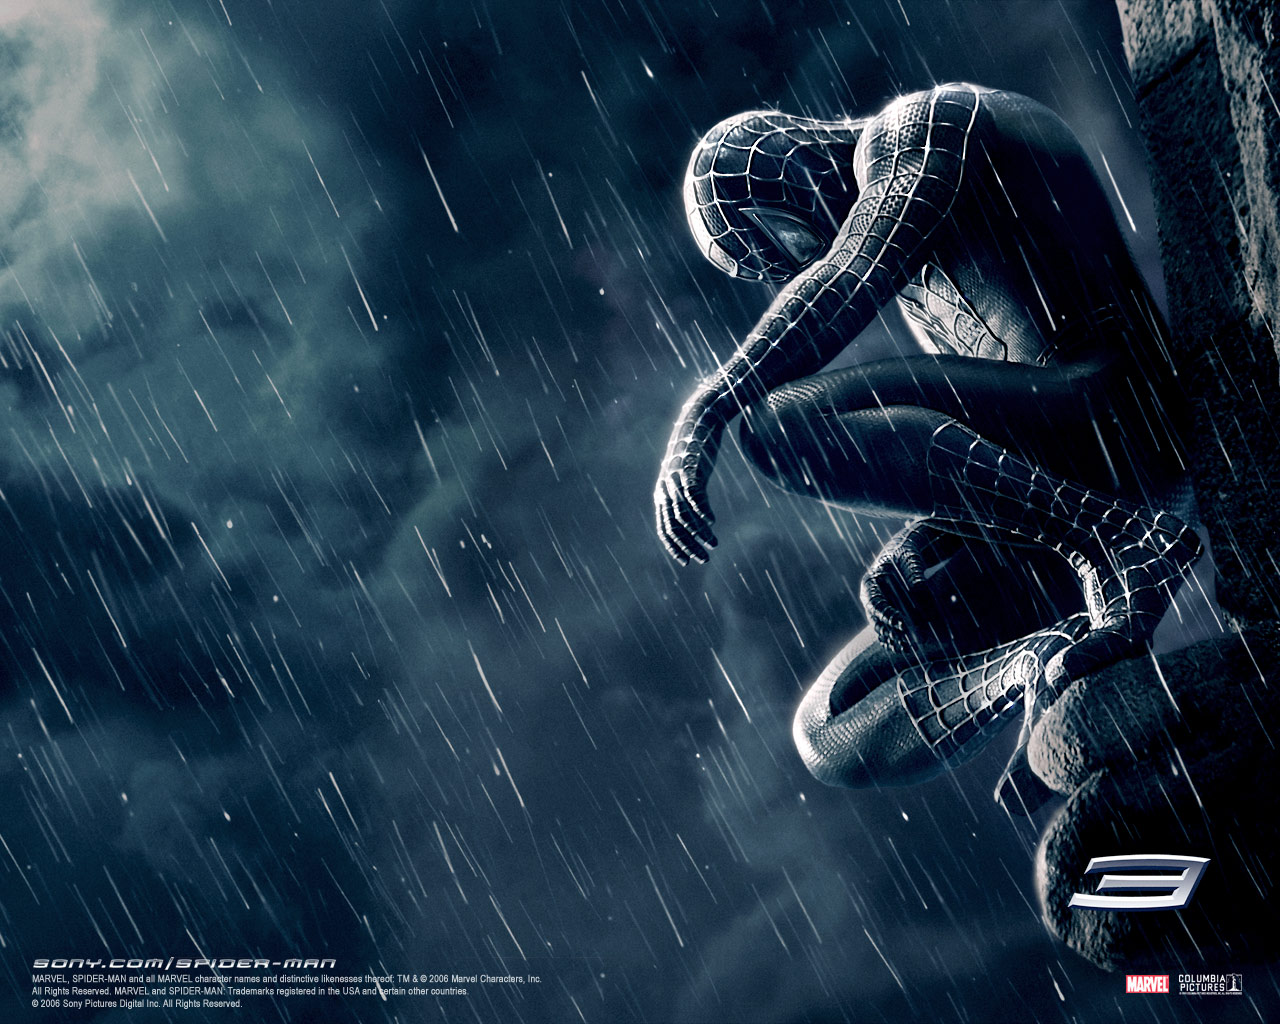 Tobey Maguire - Tobey Maguire in Spider-Man 3 Wallpaper 2 800x600